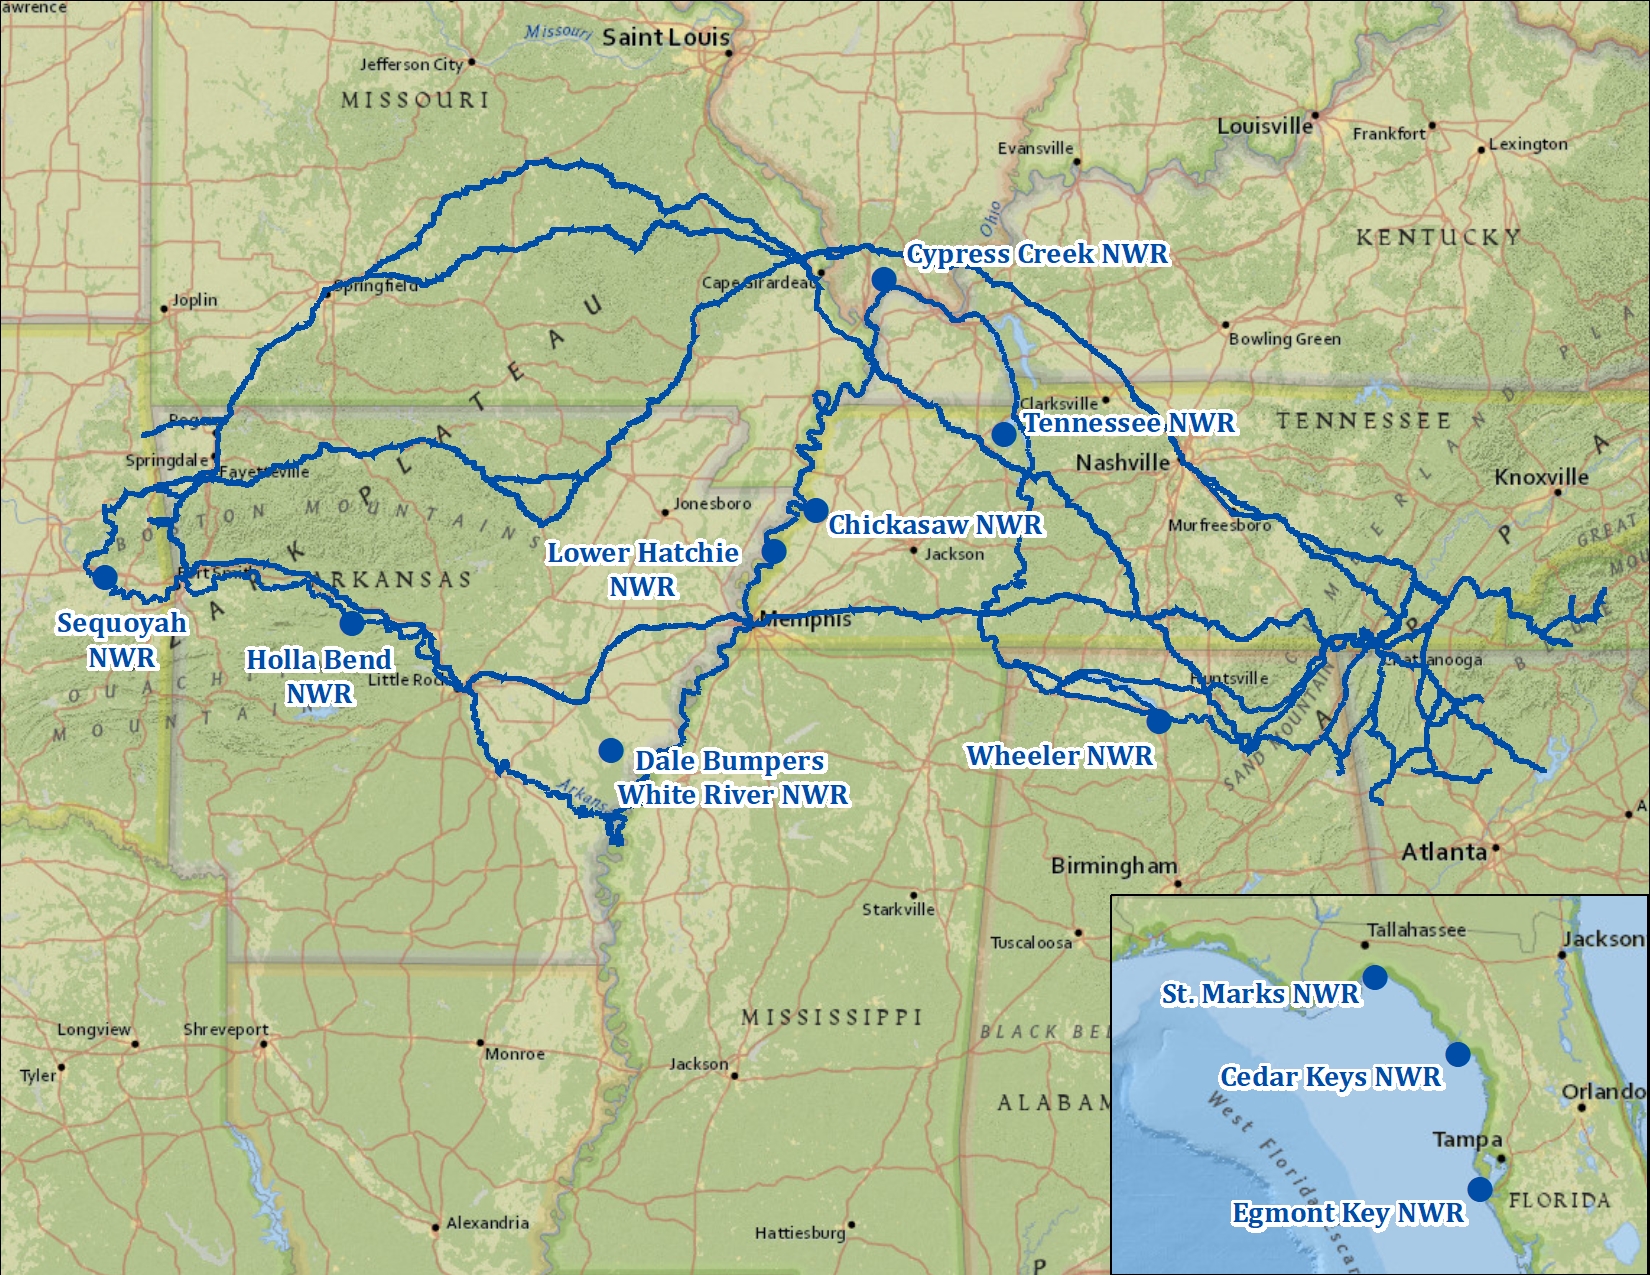 A map showing national wildlife refuges along the Trail of Tears from Florida and Alabama to Oklahoma